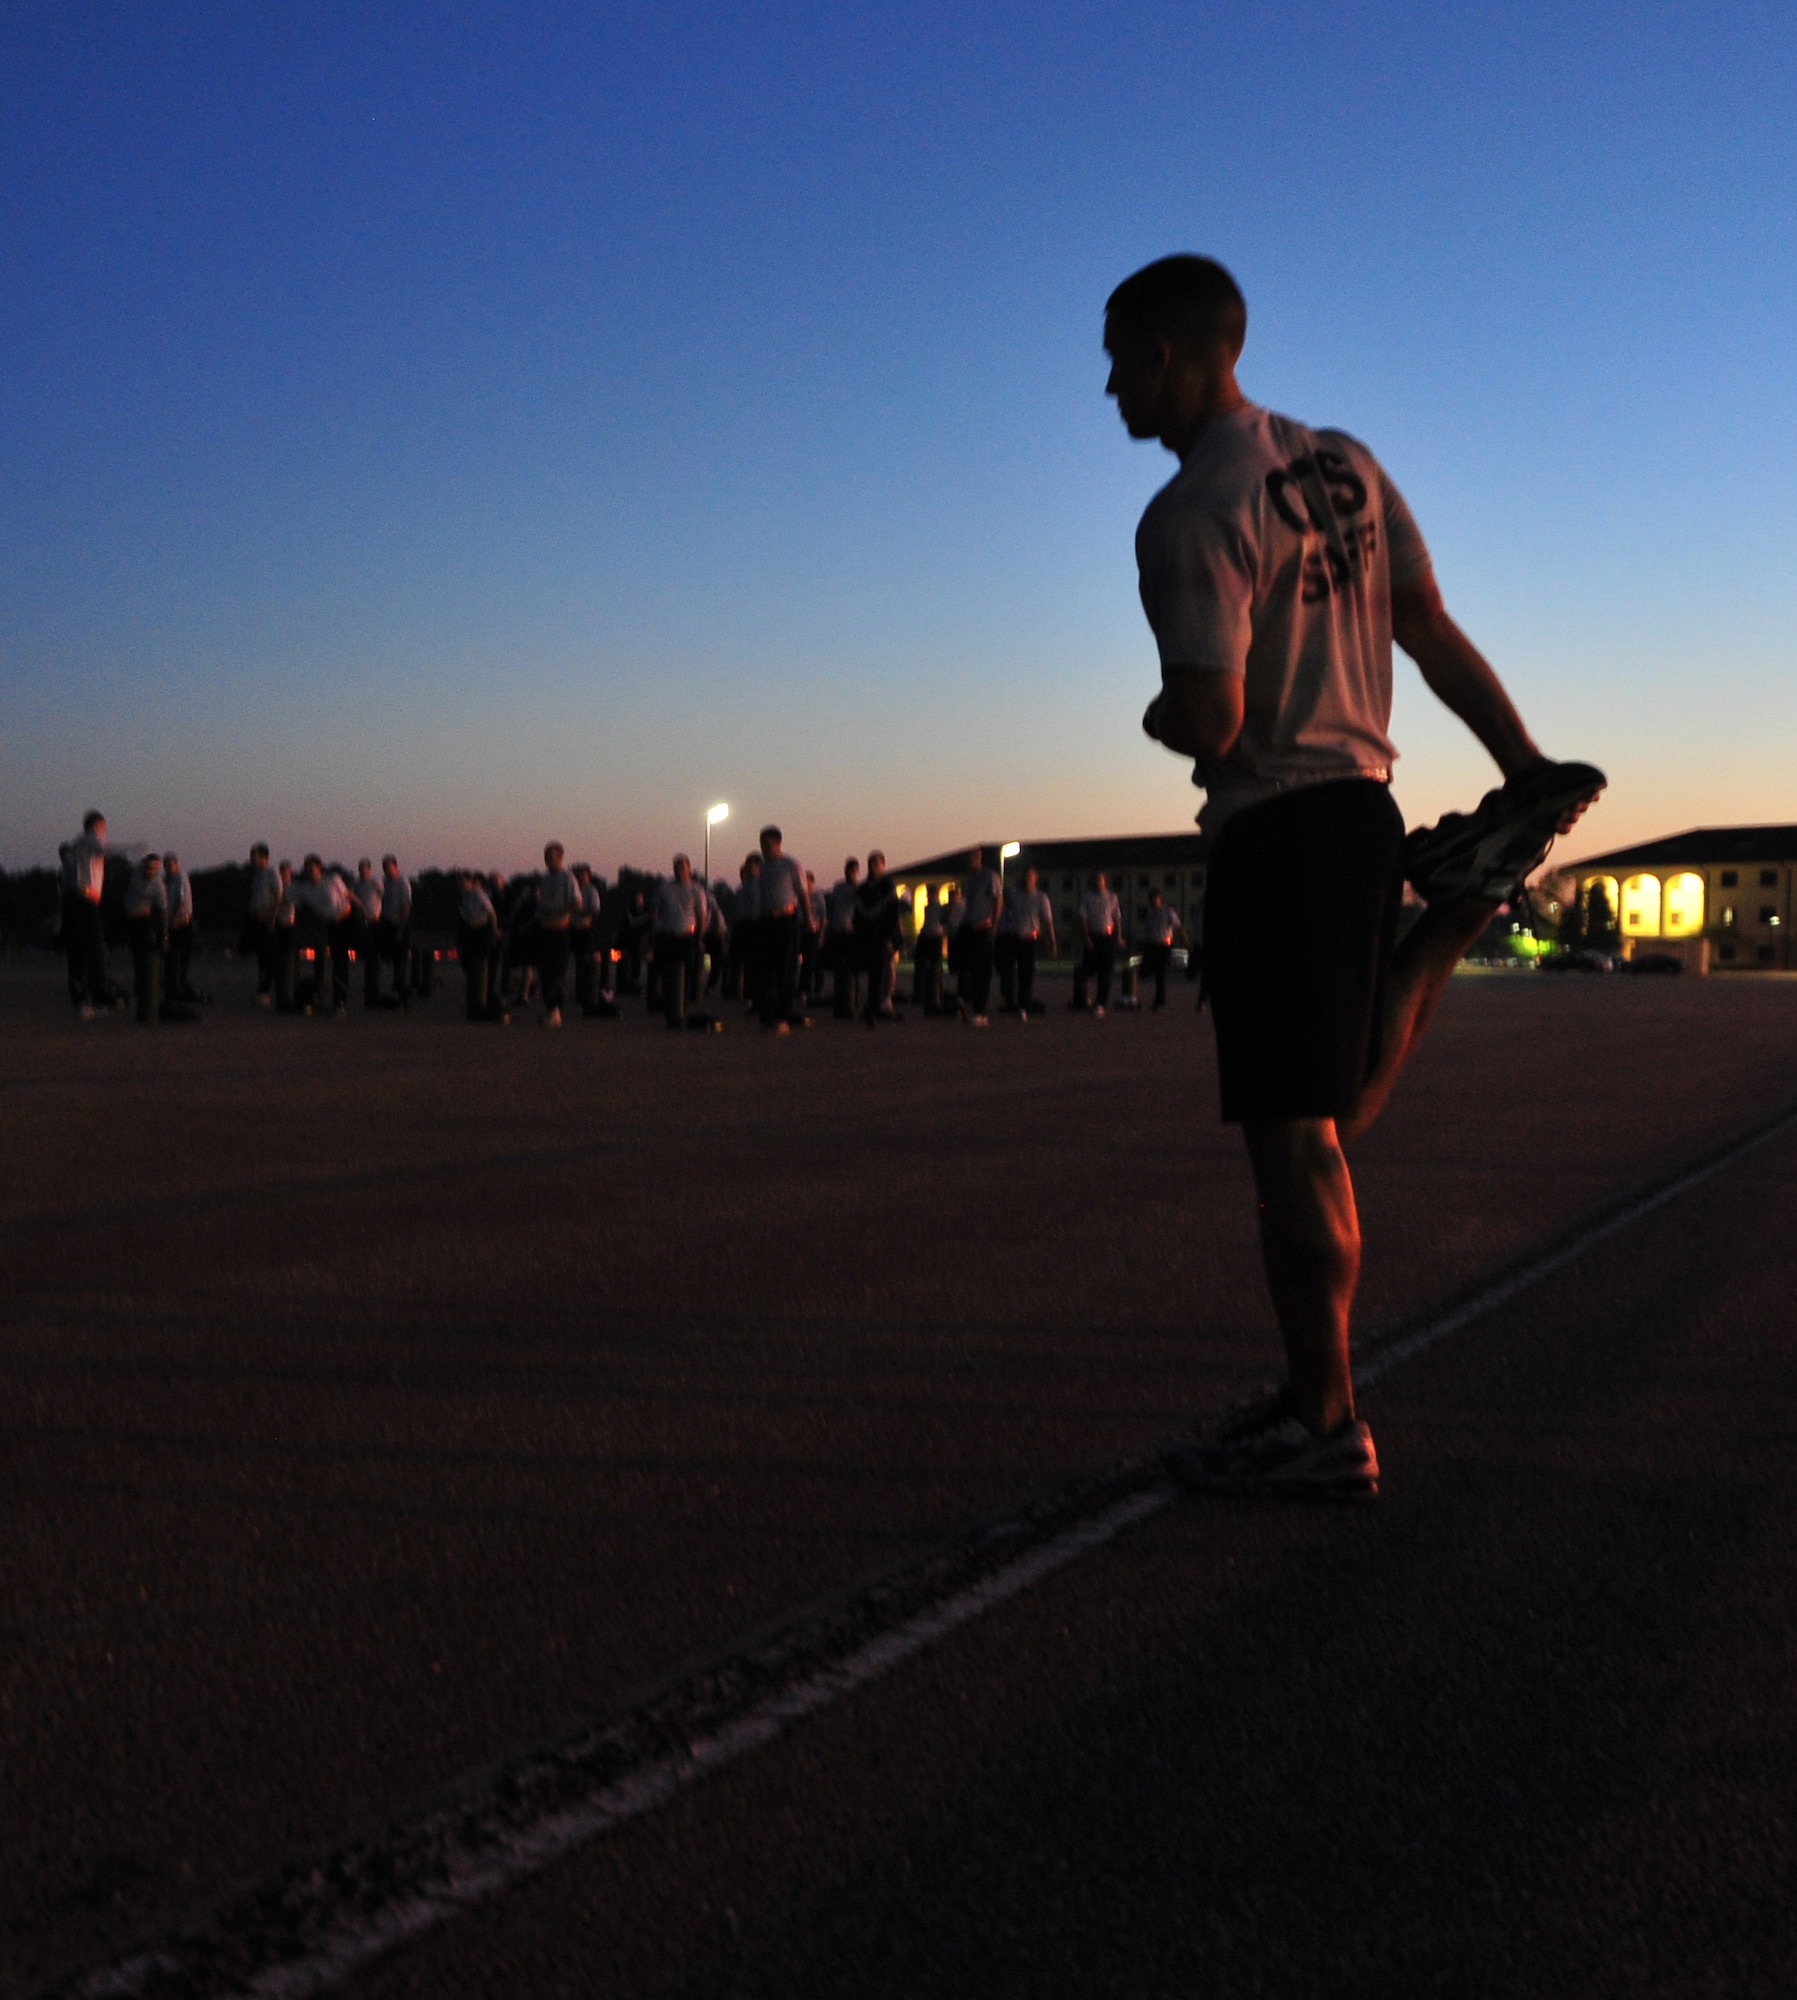 Capt. Ryan M. Thompson, 24th Training Squadron flight commander, Officer Training School, Maxwell Air Force Base, Ala. stretches during morning PT with officer trainees. (U.S. Air Force photo by Senior Airman Christopher Stoltz)